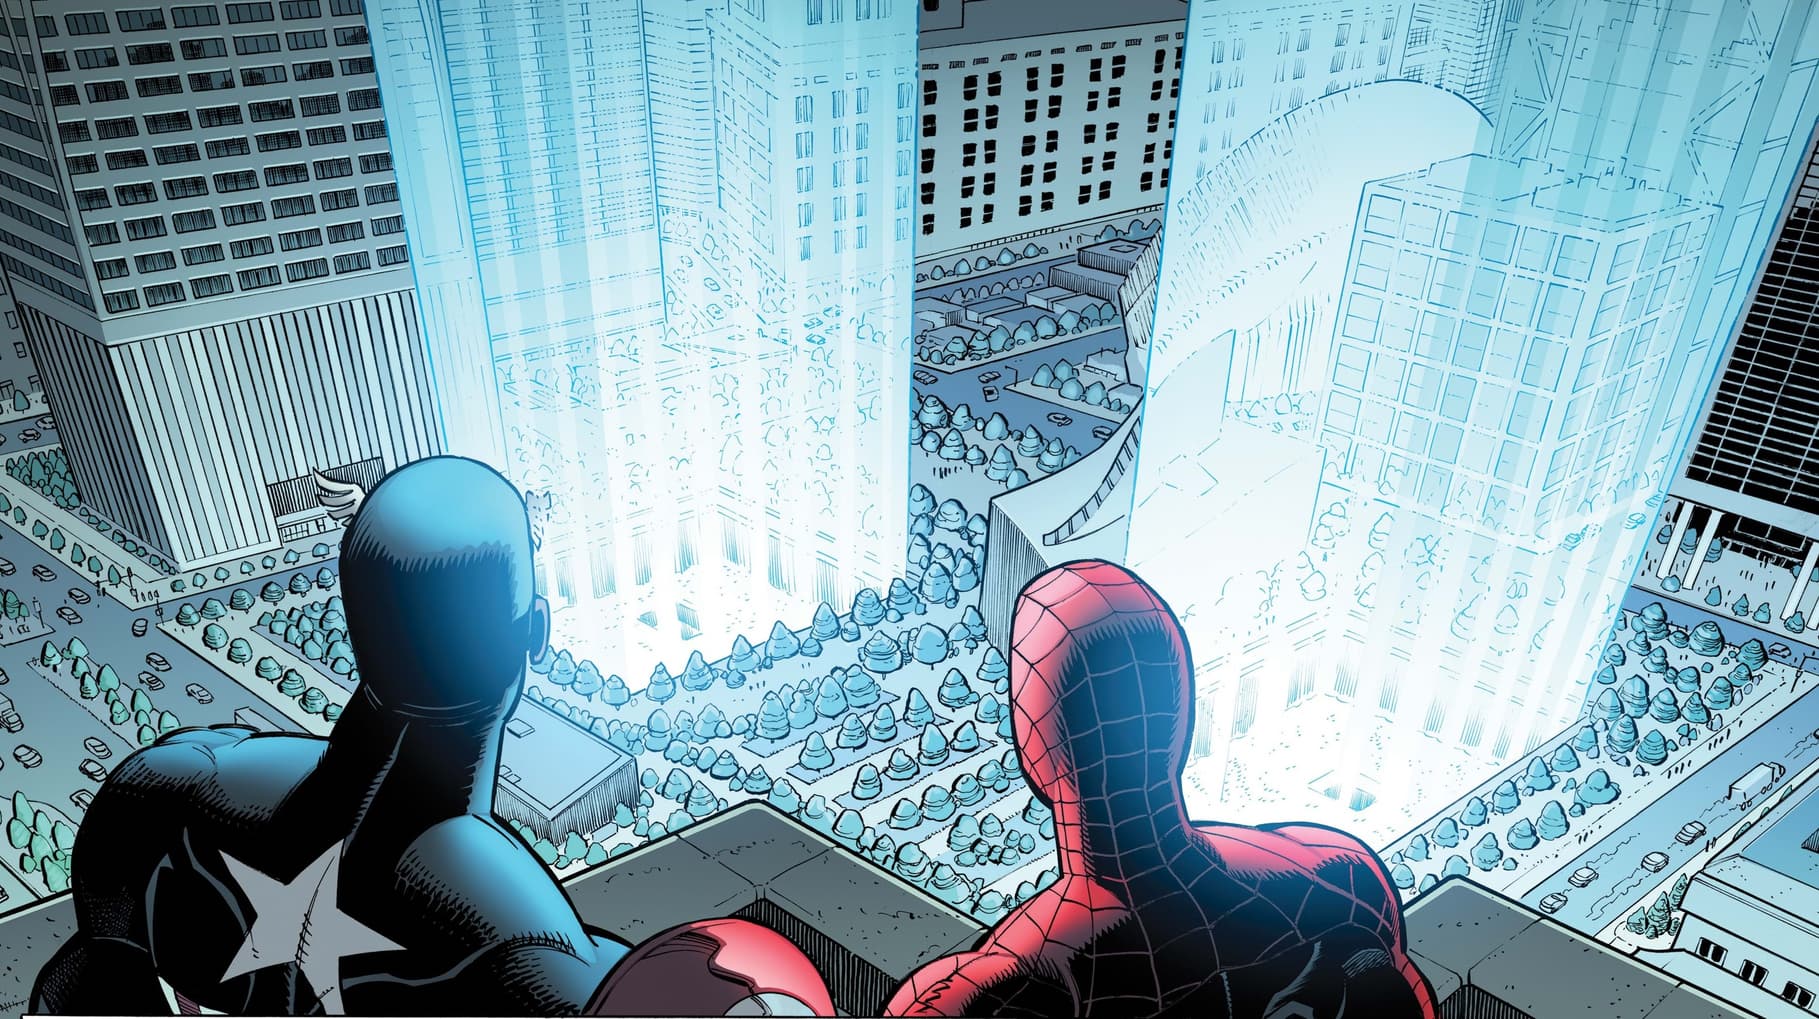 Spider-Man and Captain America pay respect to the fallen victims and heroes of 9/11.